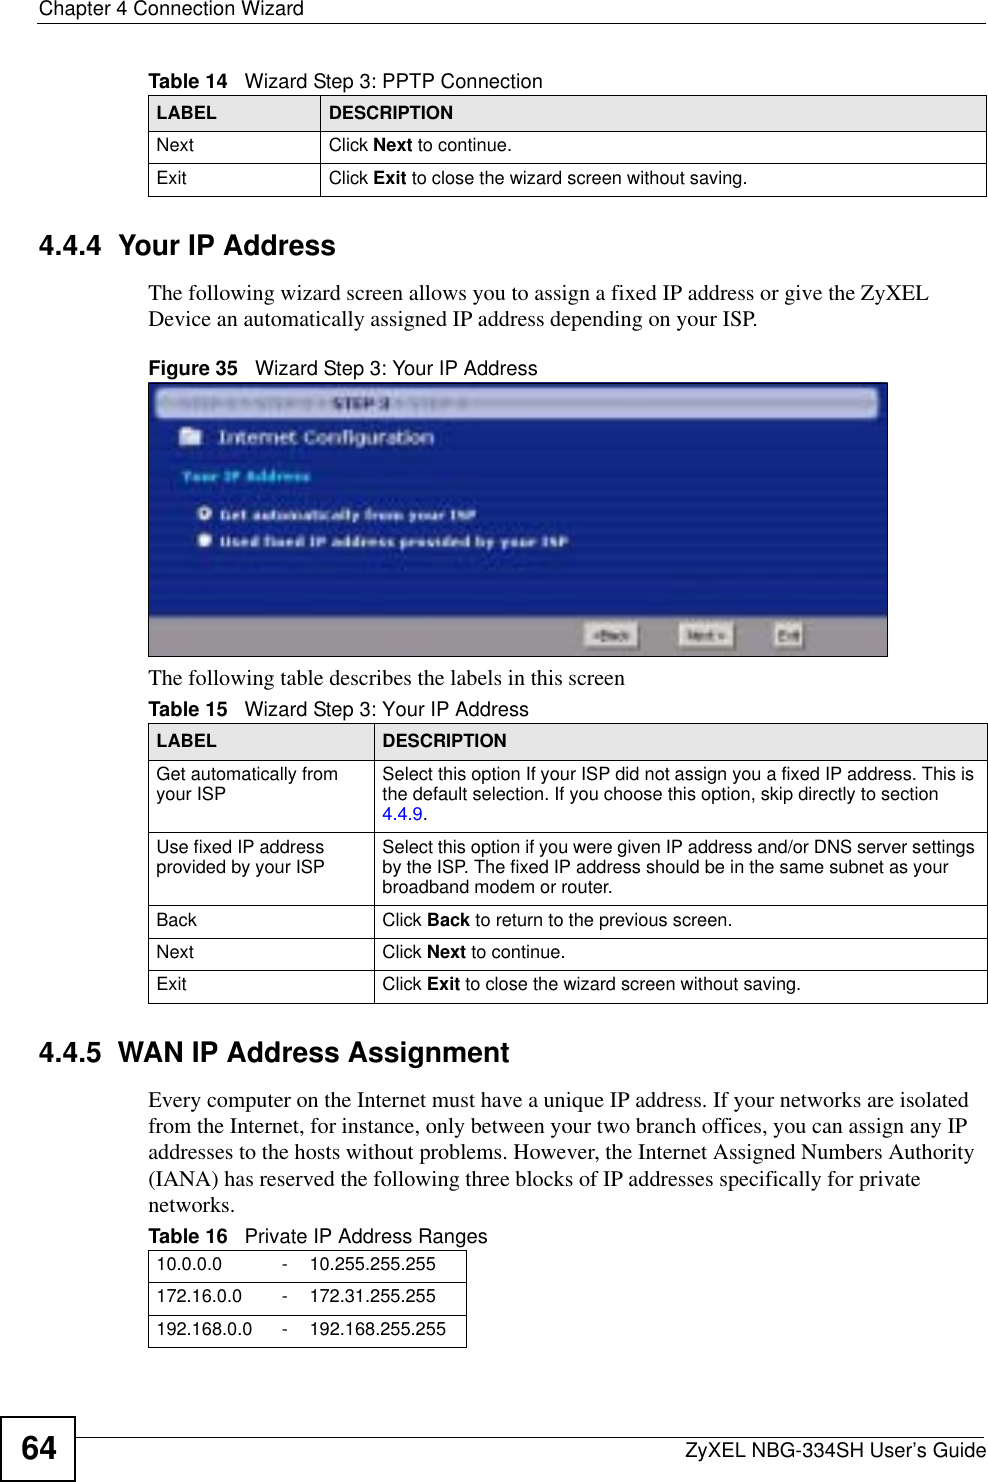 Chapter 4 Connection WizardZyXEL NBG-334SH User’s Guide644.4.4  Your IP AddressThe following wizard screen allows you to assign a fixed IP address or give the ZyXEL Device an automatically assigned IP address depending on your ISP.Figure 35   Wizard Step 3: Your IP AddressThe following table describes the labels in this screen4.4.5  WAN IP Address AssignmentEvery computer on the Internet must have a unique IP address. If your networks are isolated from the Internet, for instance, only between your two branch offices, you can assign any IP addresses to the hosts without problems. However, the Internet Assigned Numbers Authority (IANA) has reserved the following three blocks of IP addresses specifically for private networks.Next Click Next to continue. Exit Click Exit to close the wizard screen without saving.Table 14   Wizard Step 3: PPTP ConnectionLABEL DESCRIPTIONTable 15   Wizard Step 3: Your IP AddressLABEL DESCRIPTIONGet automatically from your ISP  Select this option If your ISP did not assign you a fixed IP address. This is the default selection. If you choose this option, skip directly to section 4.4.9.Use fixed IP address provided by your ISP Select this option if you were given IP address and/or DNS server settings by the ISP. The fixed IP address should be in the same subnet as your broadband modem or router. Back Click Back to return to the previous screen.Next Click Next to continue. Exit Click Exit to close the wizard screen without saving.Table 16   Private IP Address Ranges10.0.0.0 -10.255.255.255172.16.0.0 -172.31.255.255192.168.0.0 -192.168.255.255